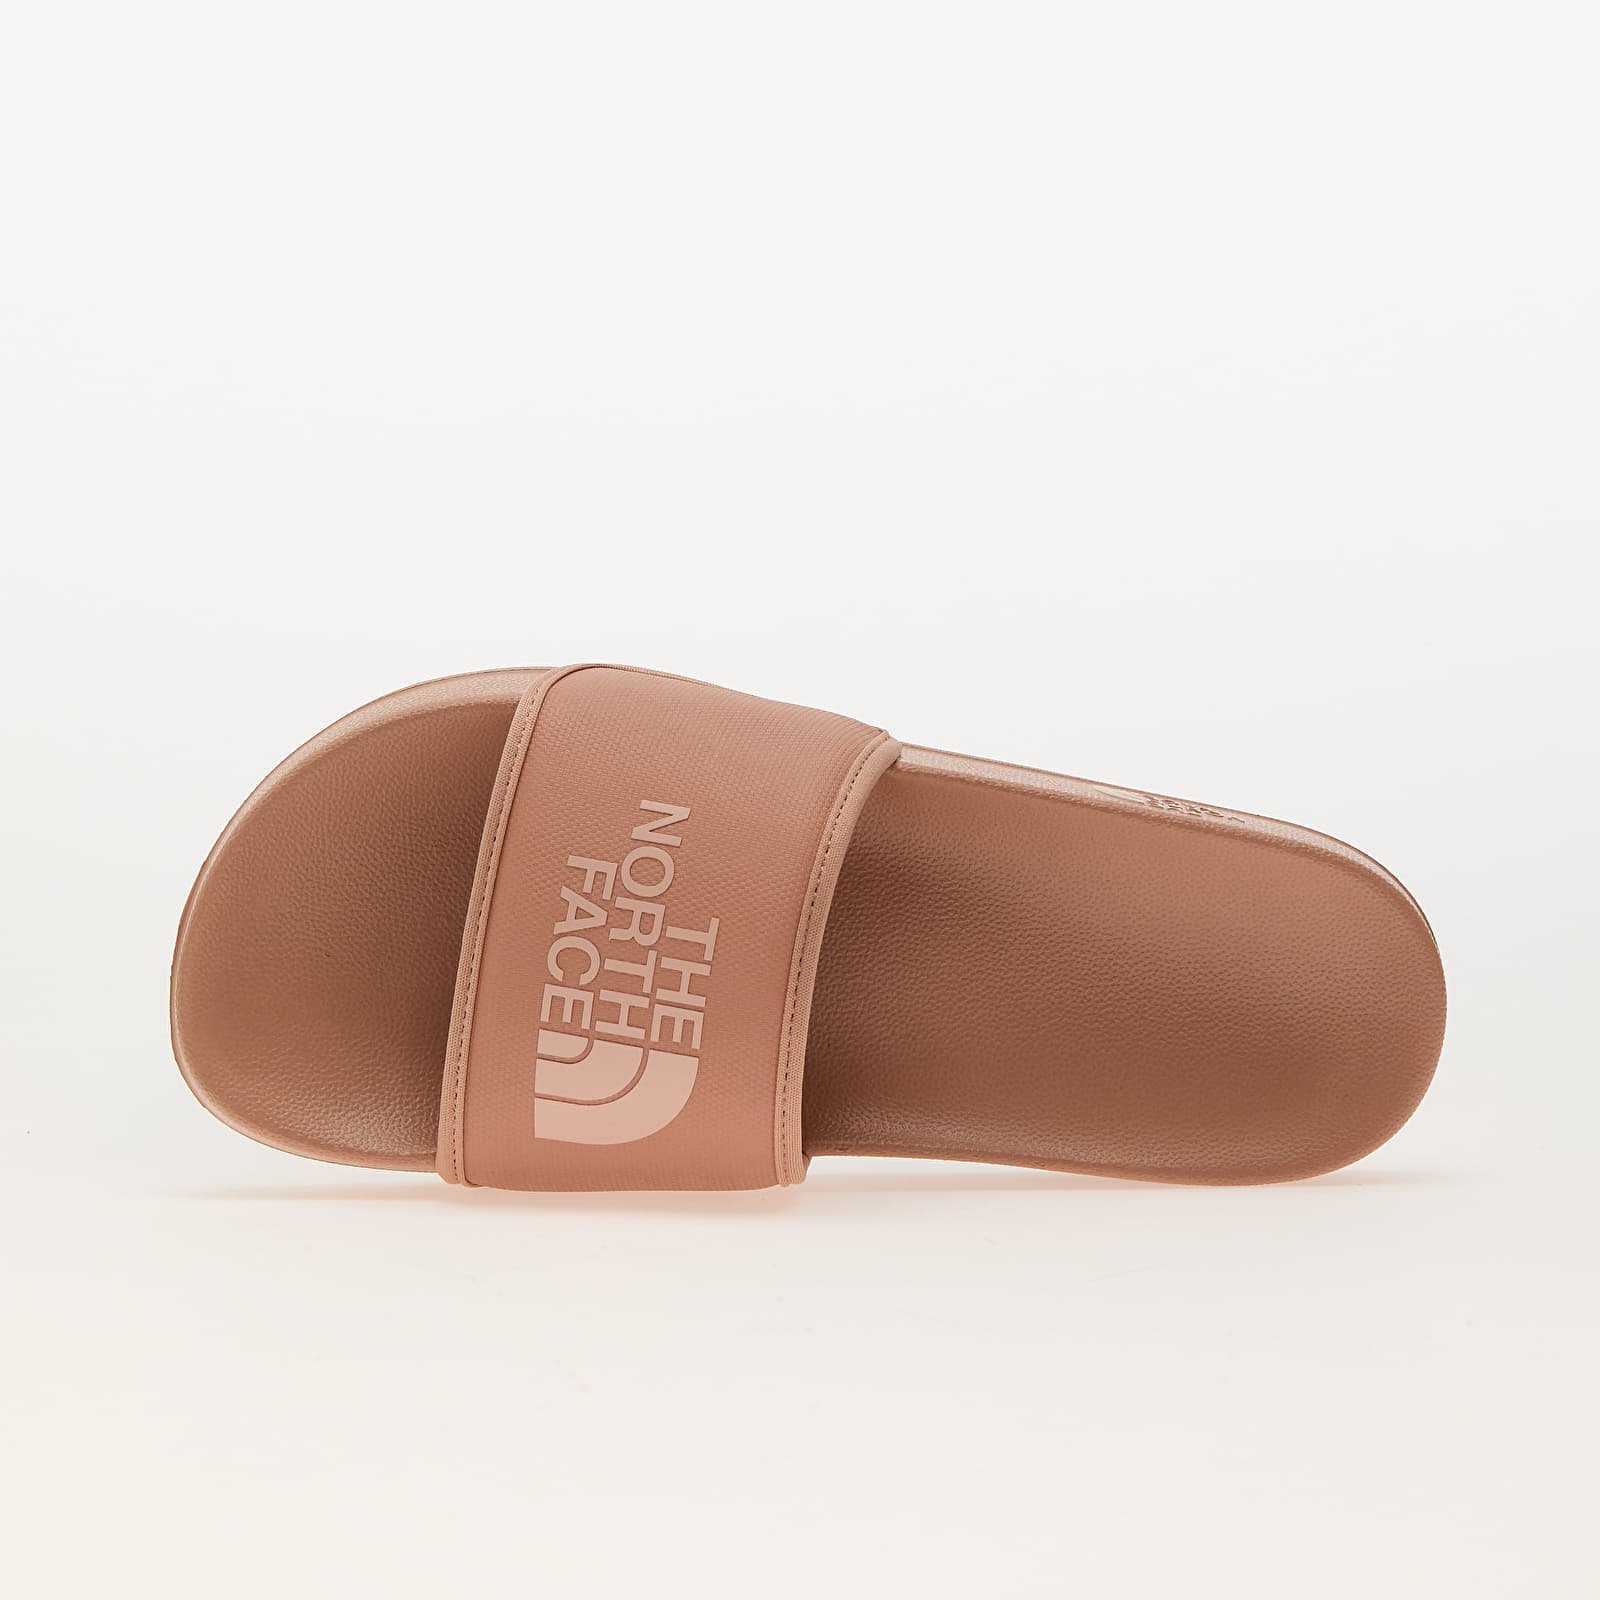 Women's Base Camp Slide in Cream/Pink, Size UK 3 | END. Clothing